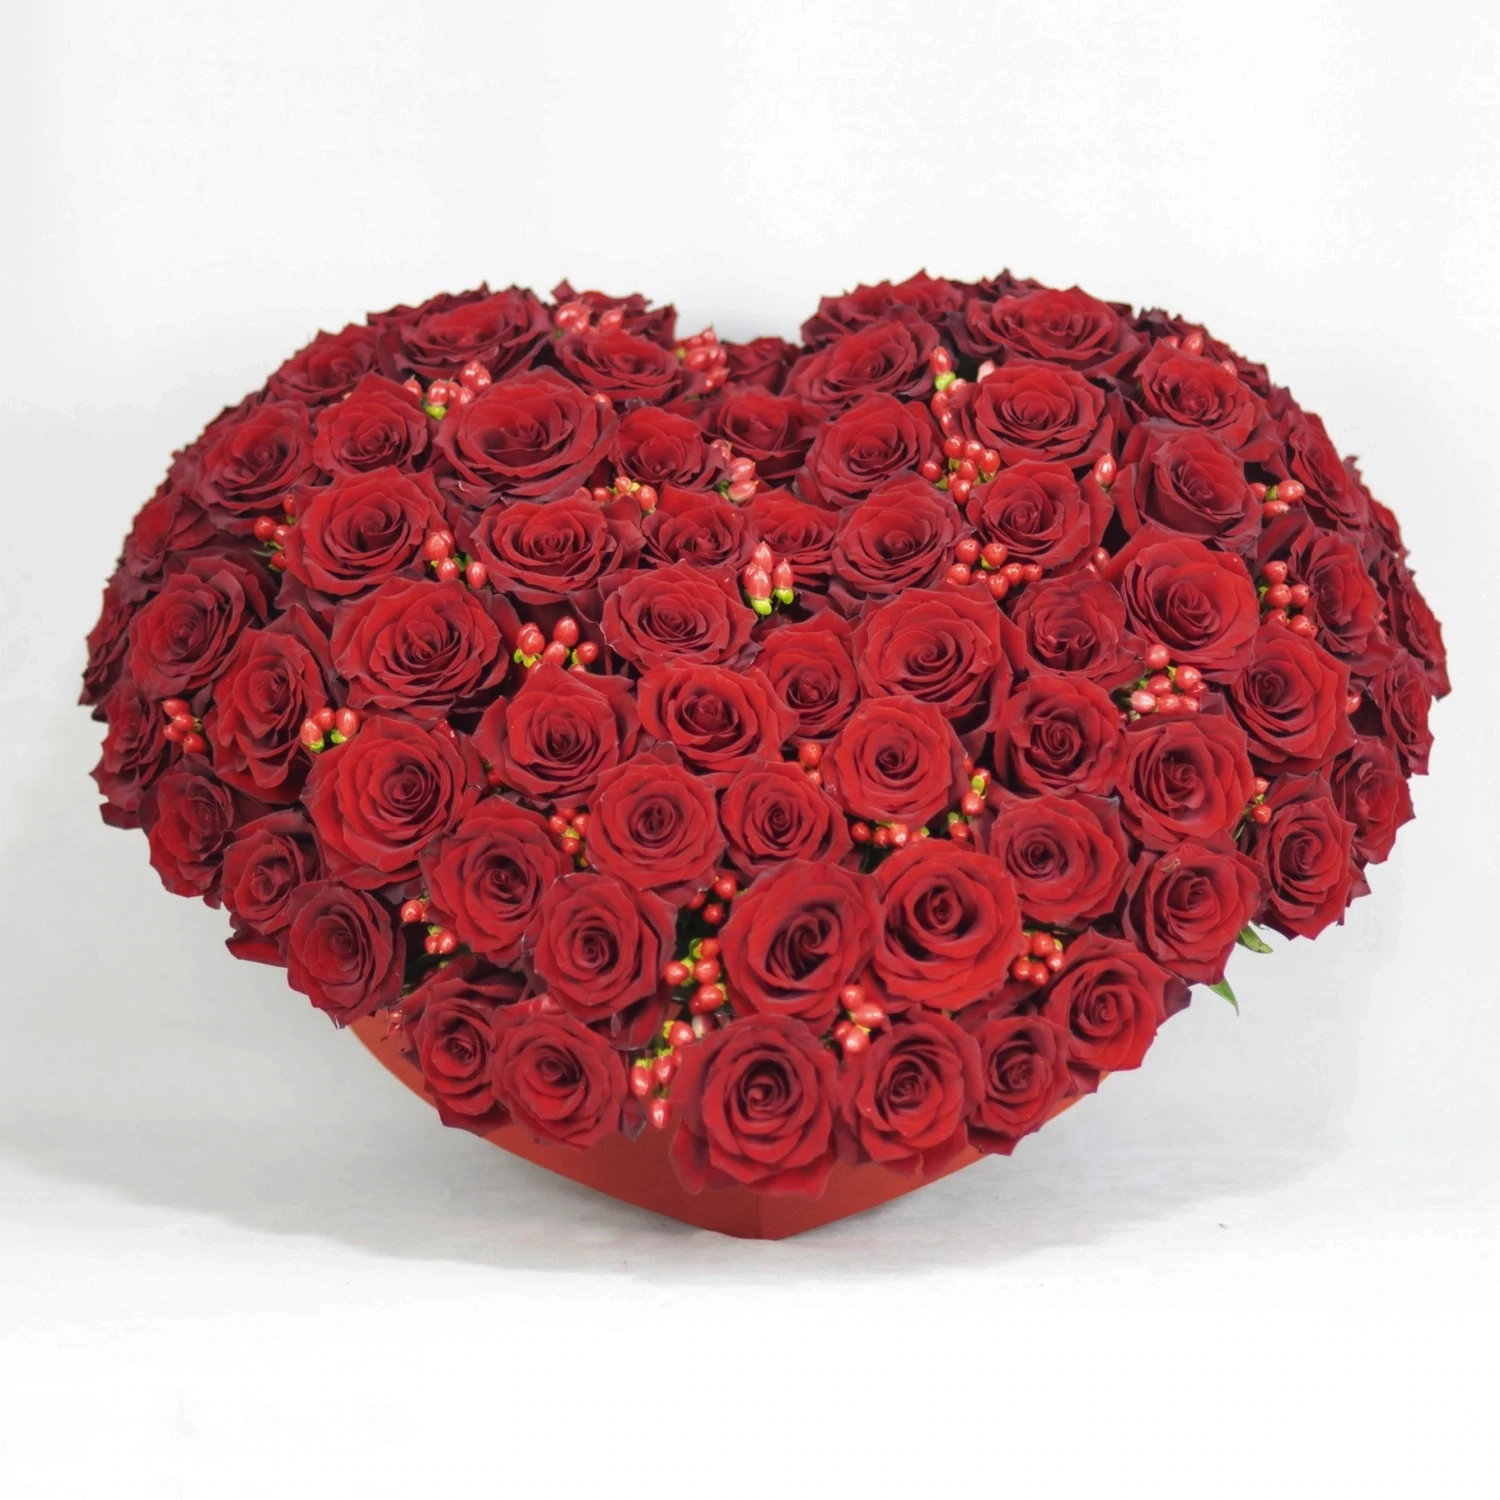 Heart Shaped composition with red roses